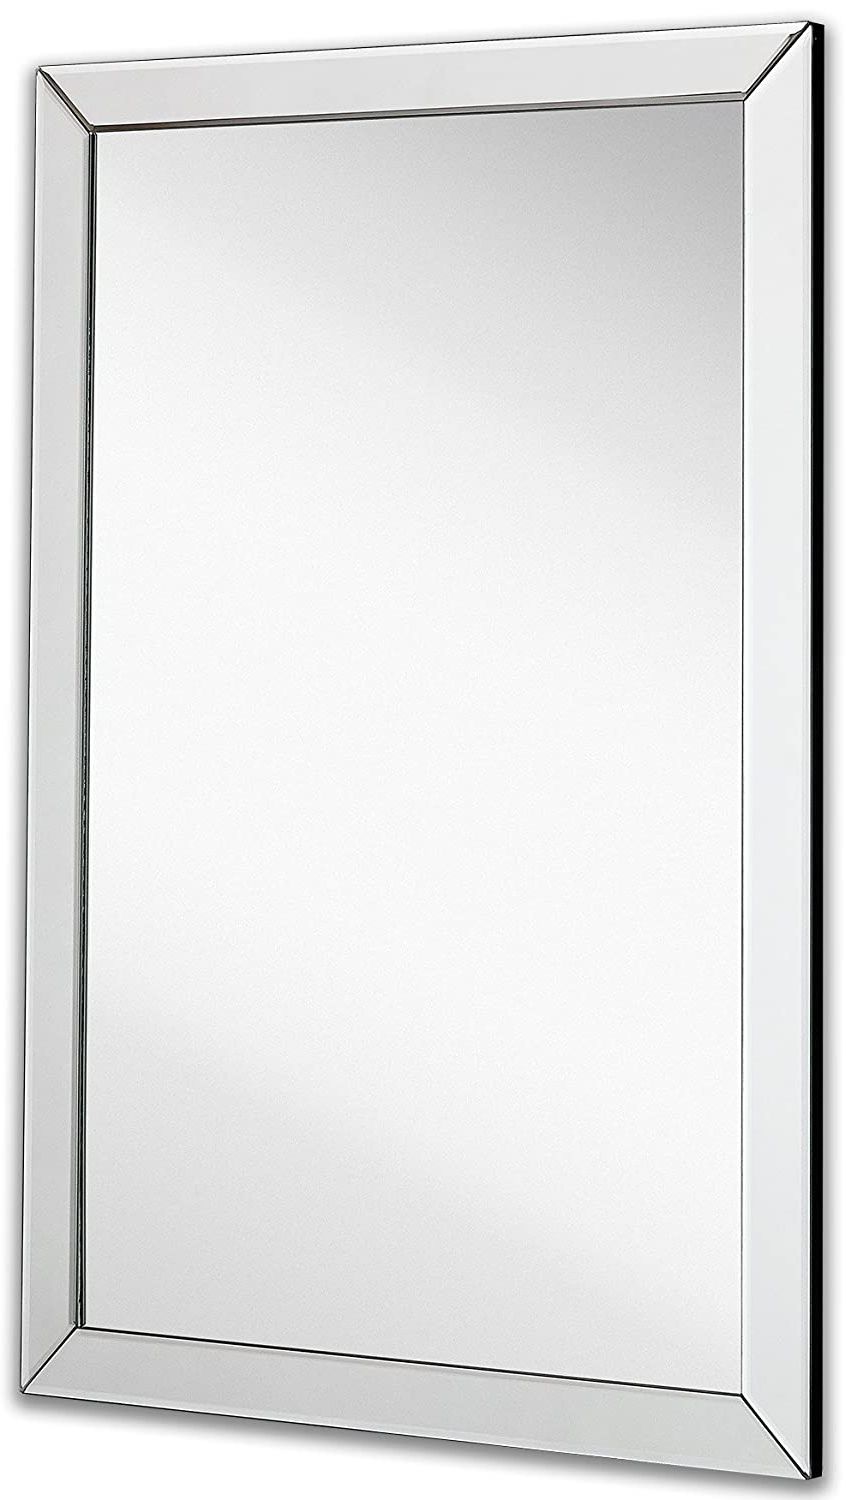 Large Flat Framed Wall Mirror With 2 Inch Edge Beveled Frame Premium Throughout Current Silver Metal Cut Edge Wall Mirrors (View 5 of 15)